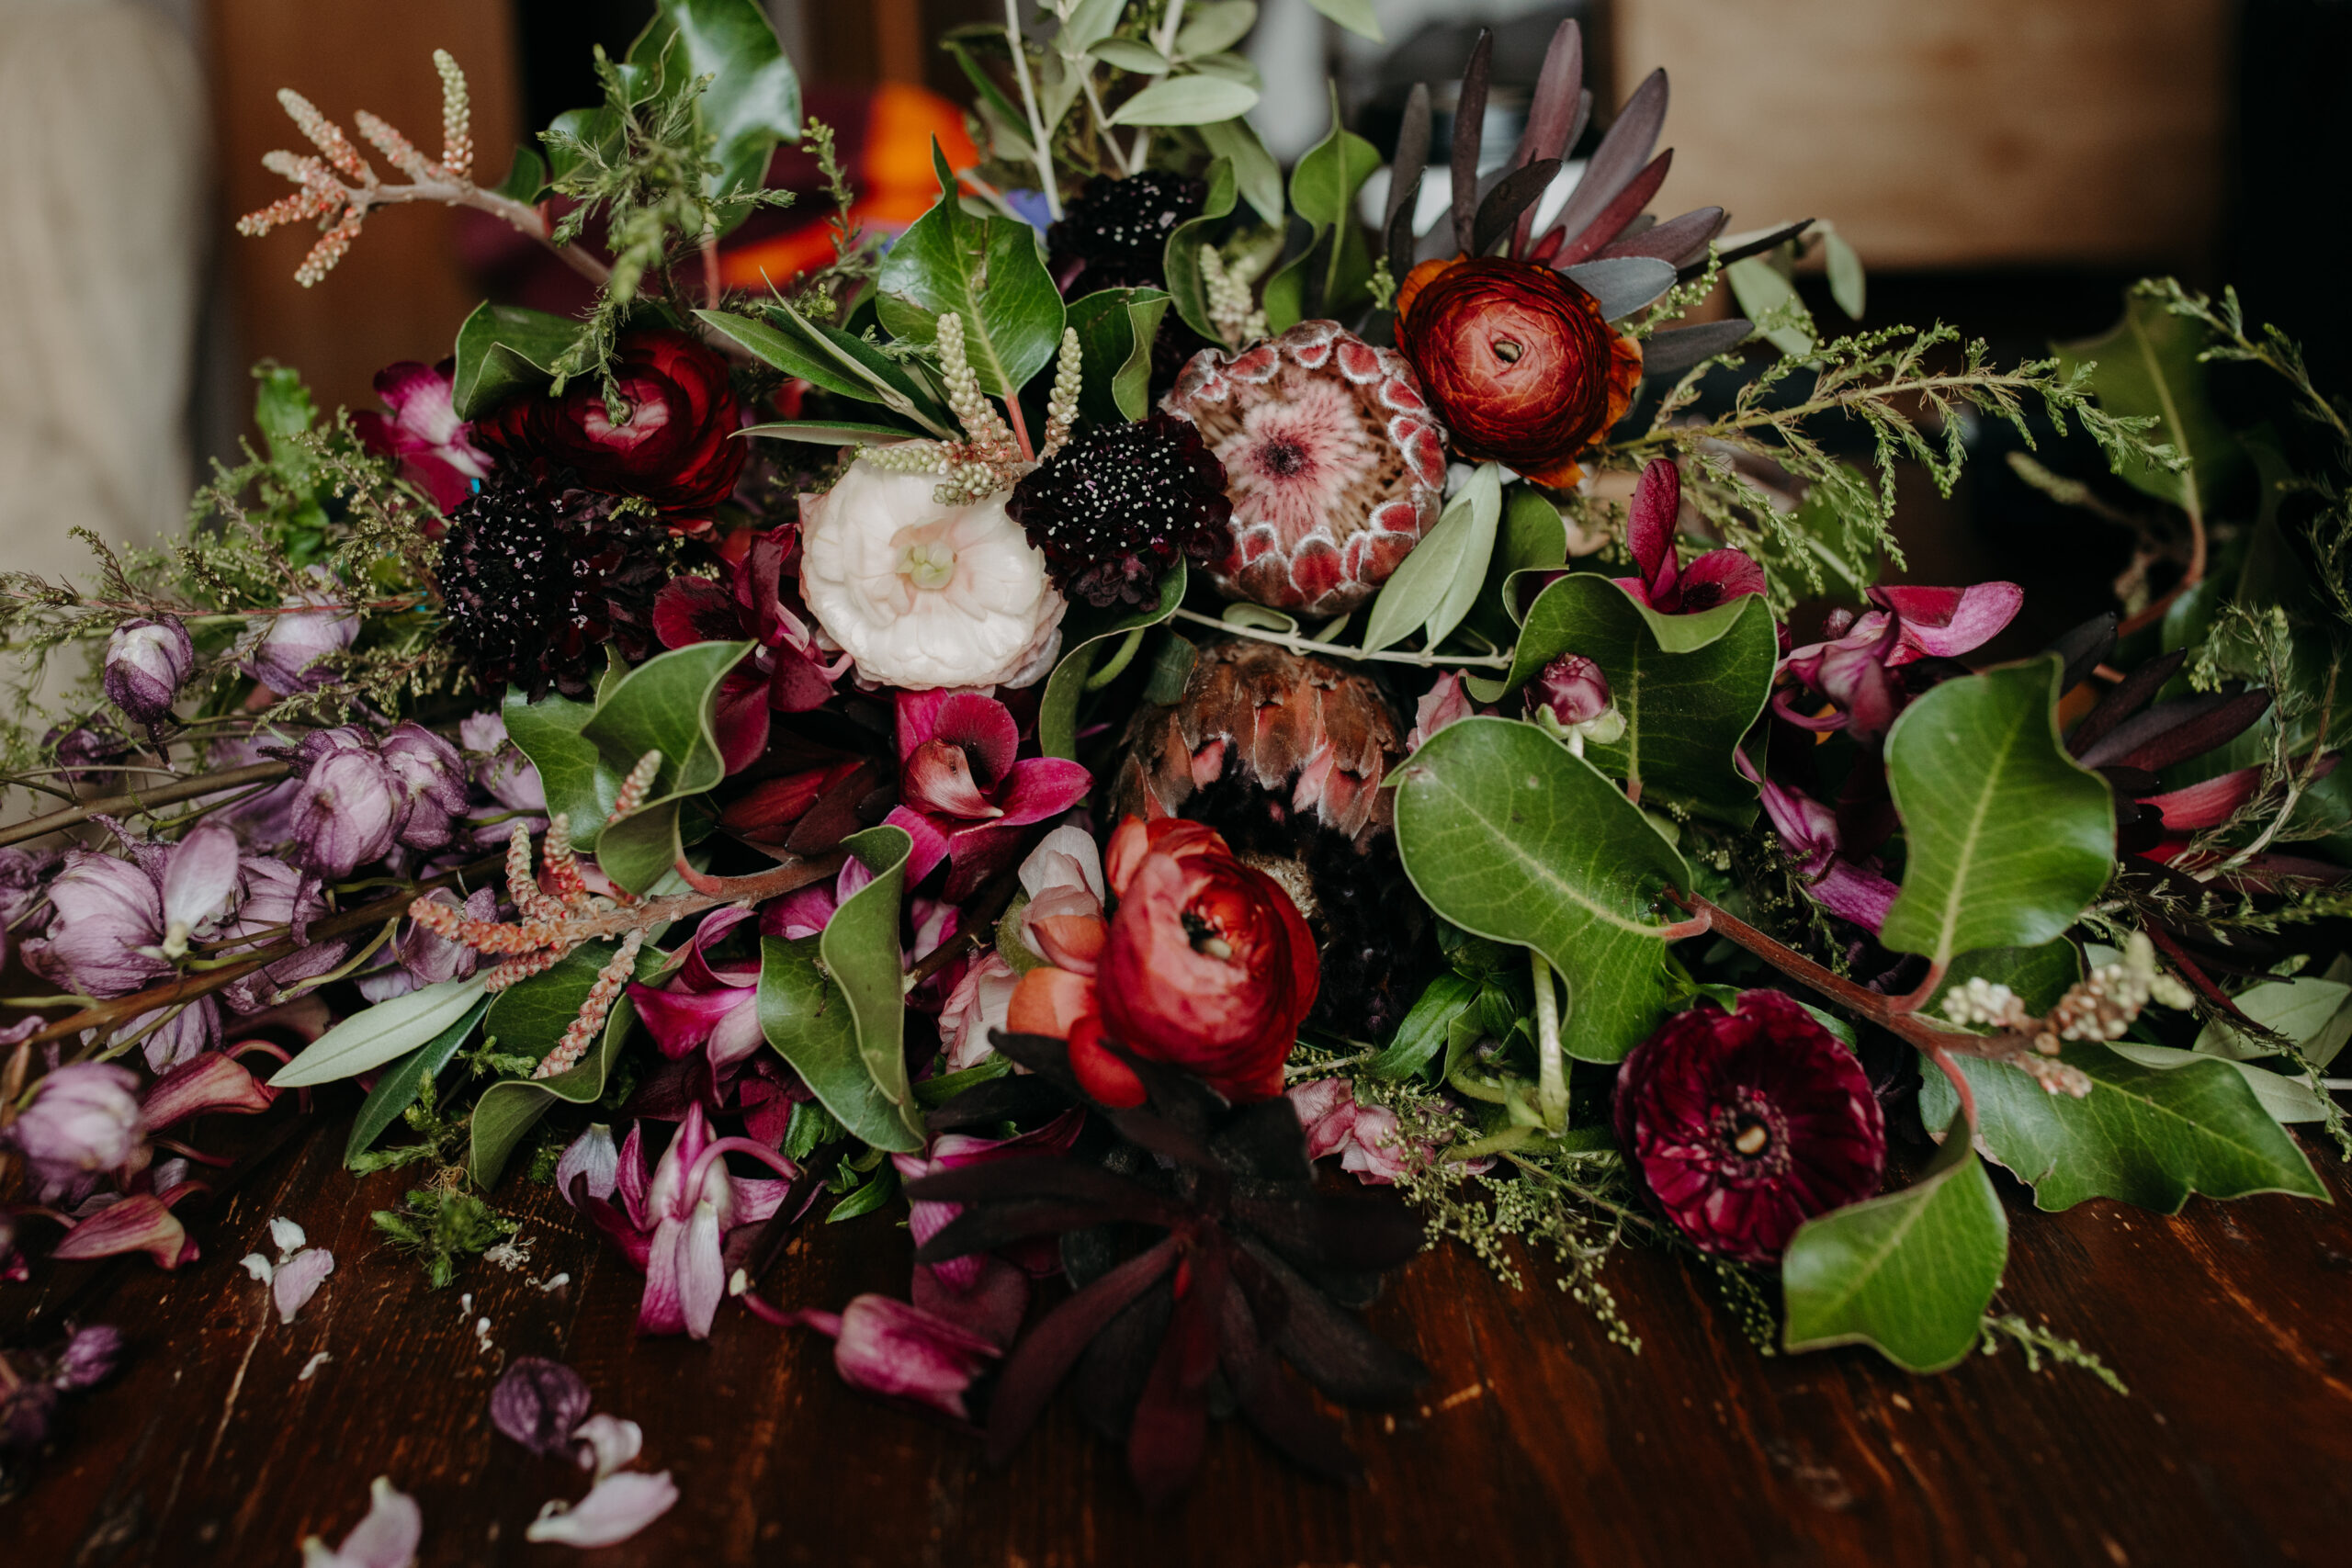 floral bouquet lies on a wooden table with green leaves, red, purple, and white flowers 